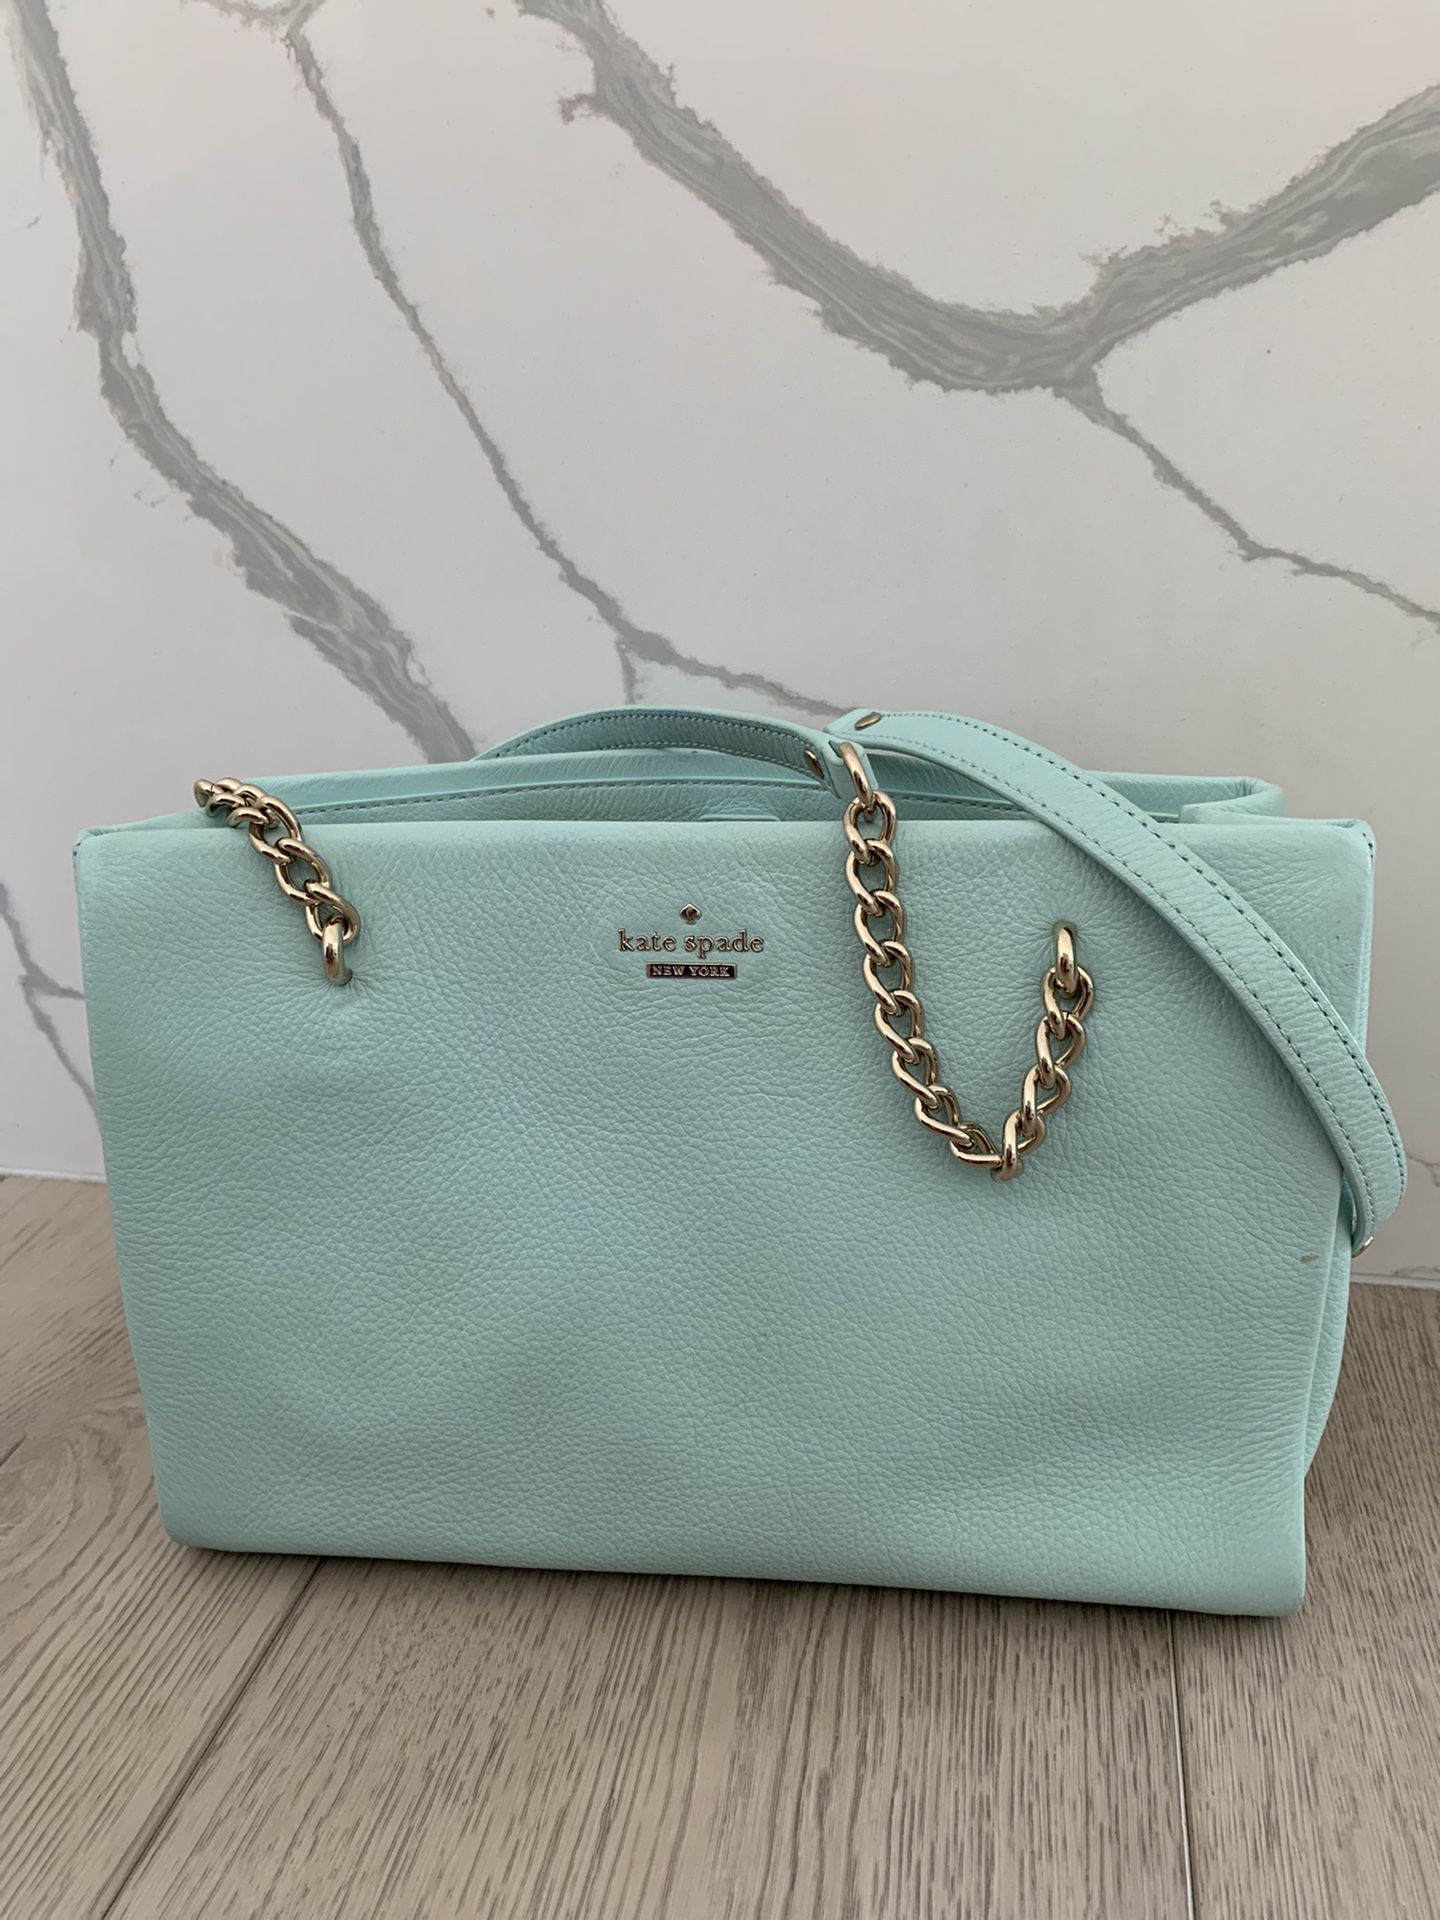 Authentic Kate Spade Purse: Teal 